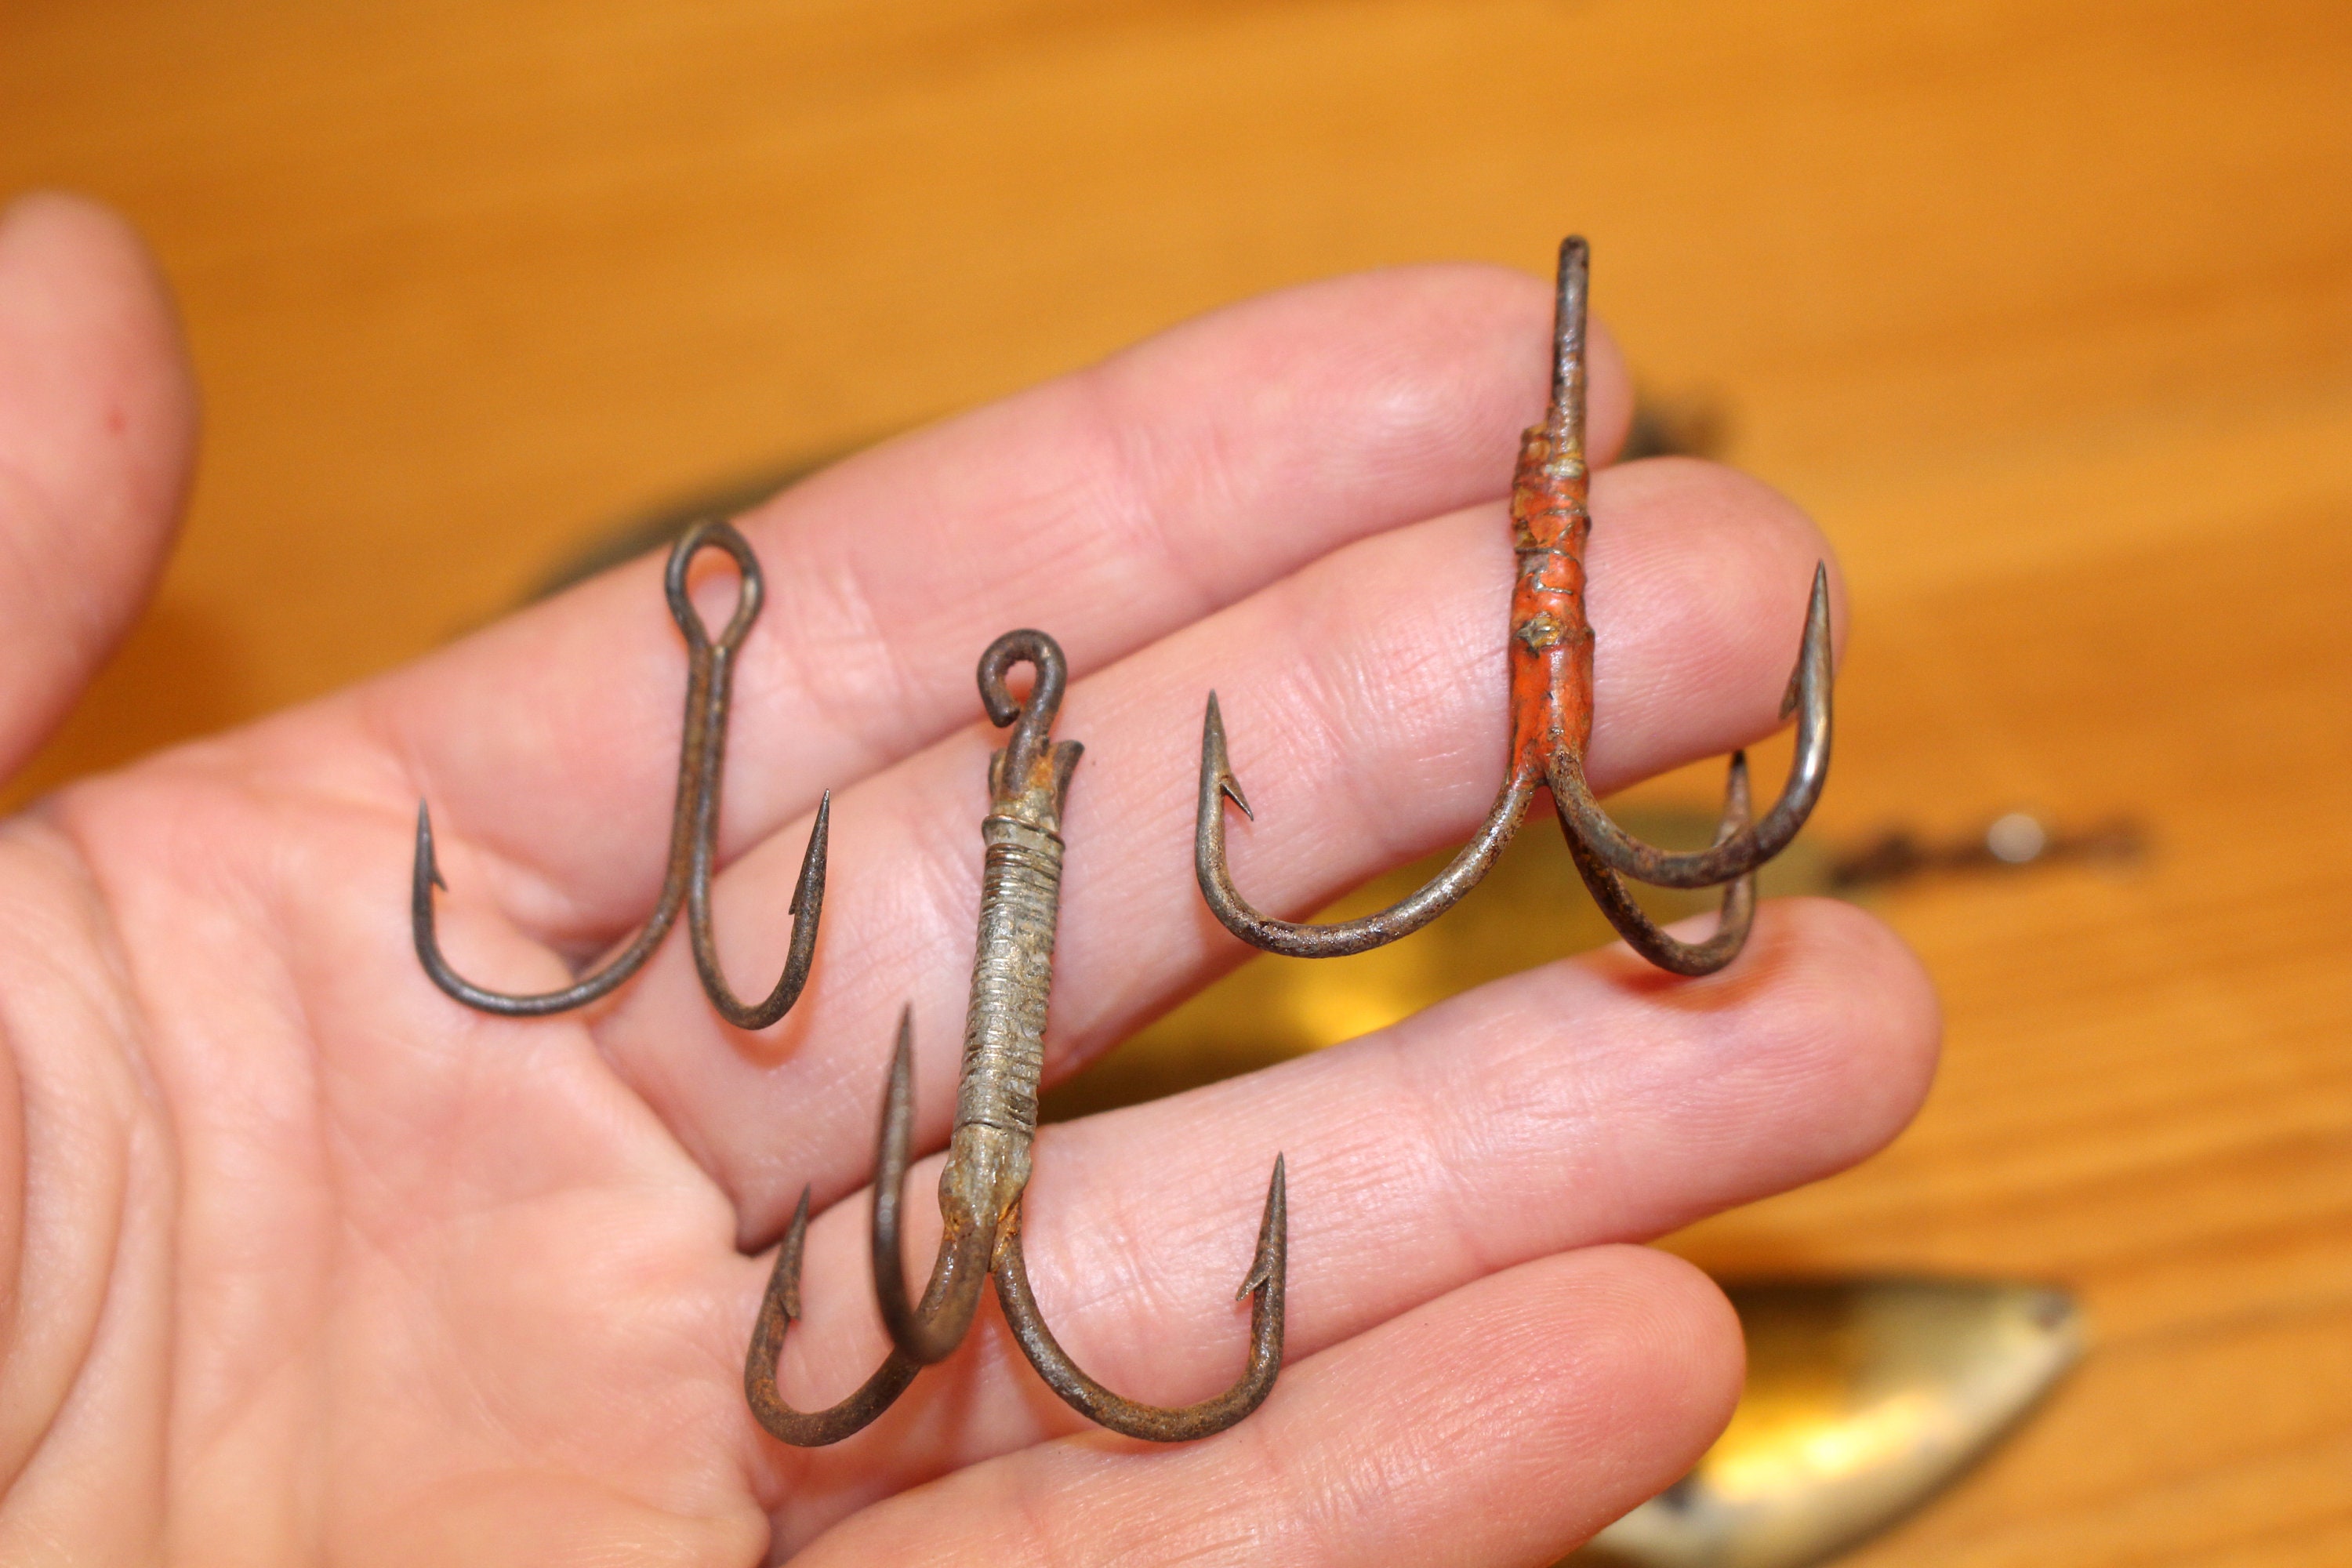 LARGE Handmade BRASS and Copper Lures Vintage Handmde Fishing